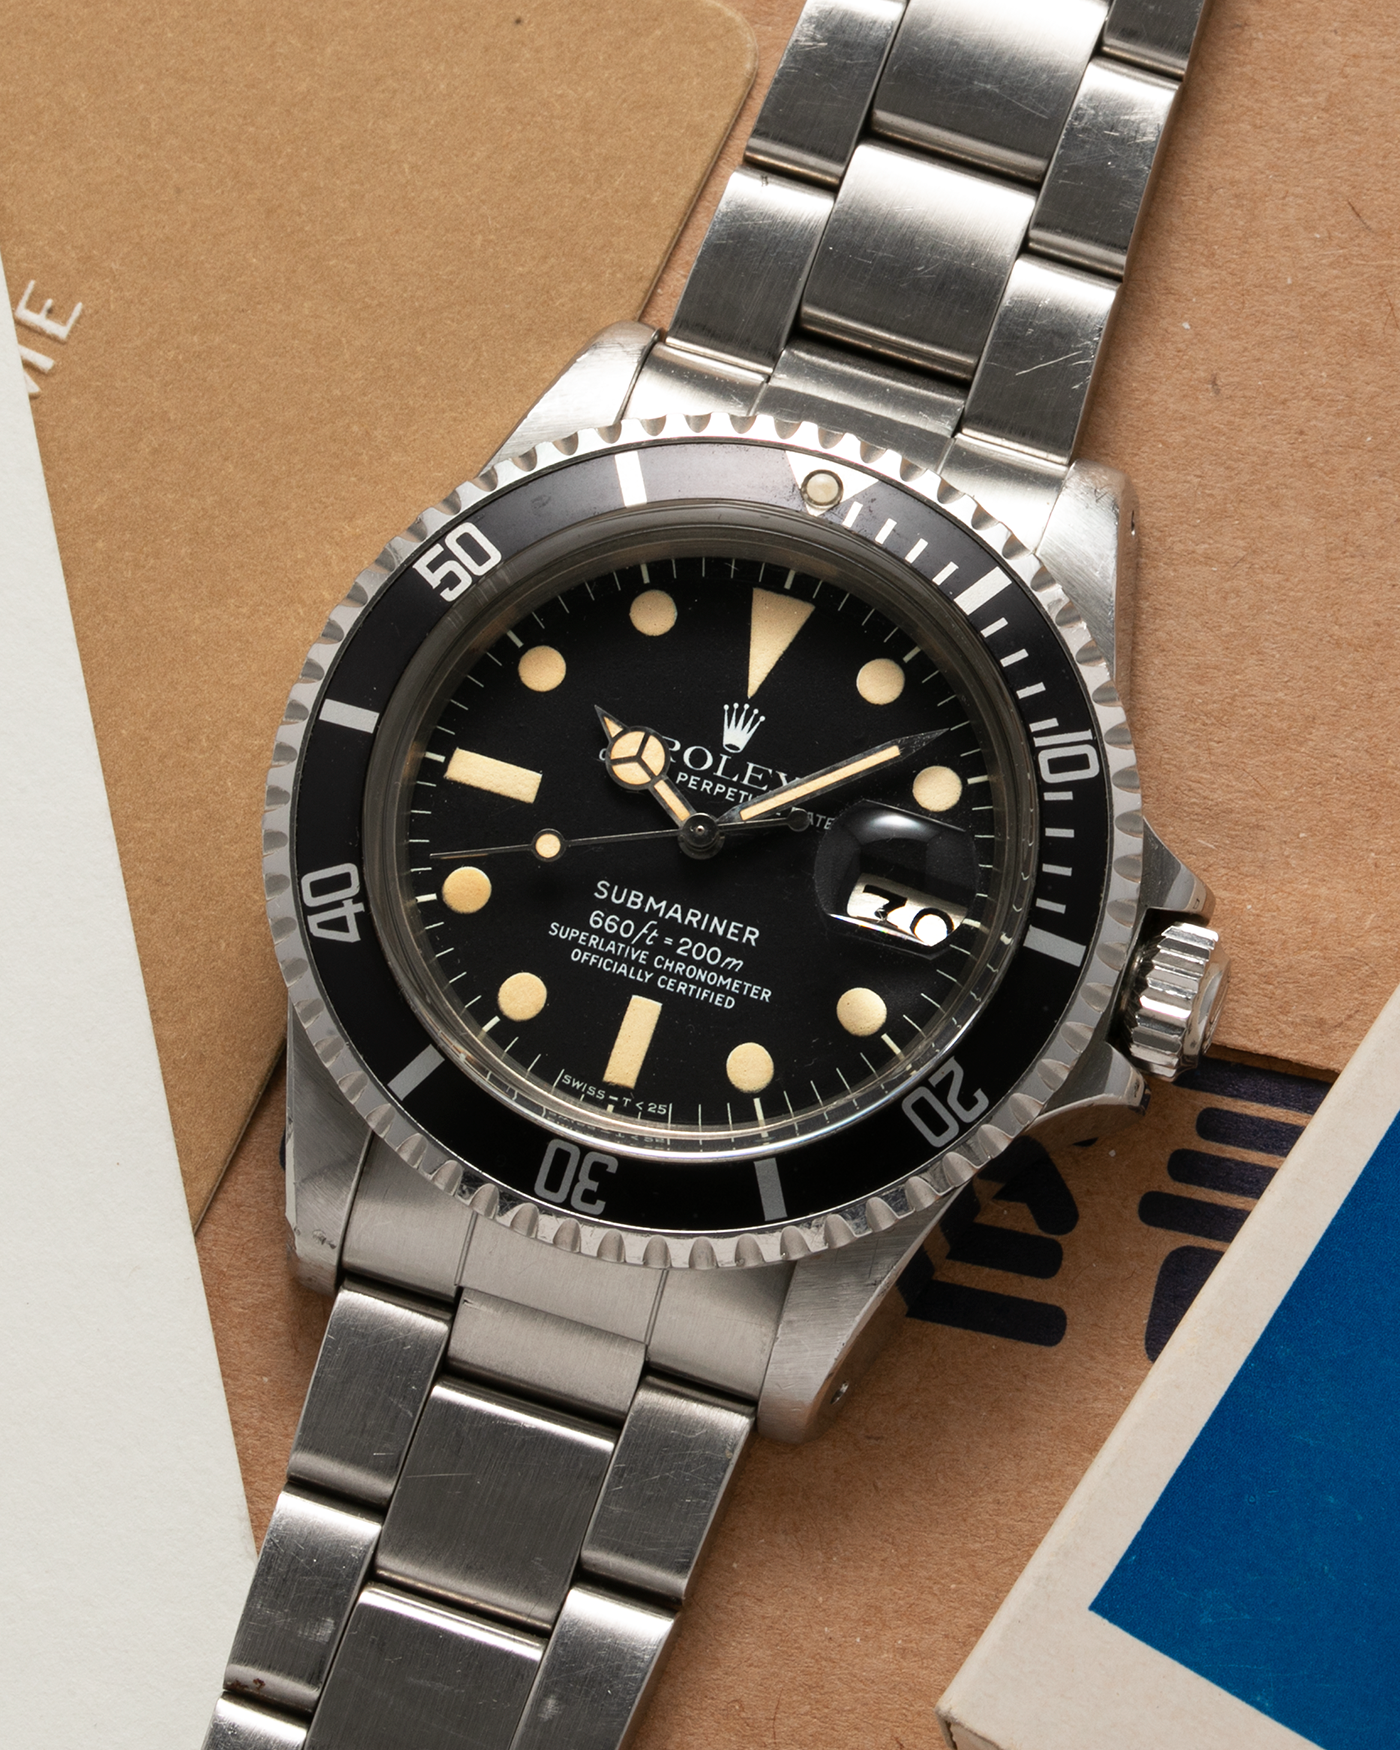 Brand: Rolex Year: 1978 Model: ‘White’ Submariner Reference Number: 1680 Serial Number: 529XXXX Material: Stainless Steel Movement: Rolex Cal. 1575, Self-Winding Case Diameter: 39mm Lug Width: 20mm Bracelet: Rolex Stainless Steel ‘93150’ Oyster bracelet with Signed ‘VB’ Clasp and ‘580’ Curved End Links